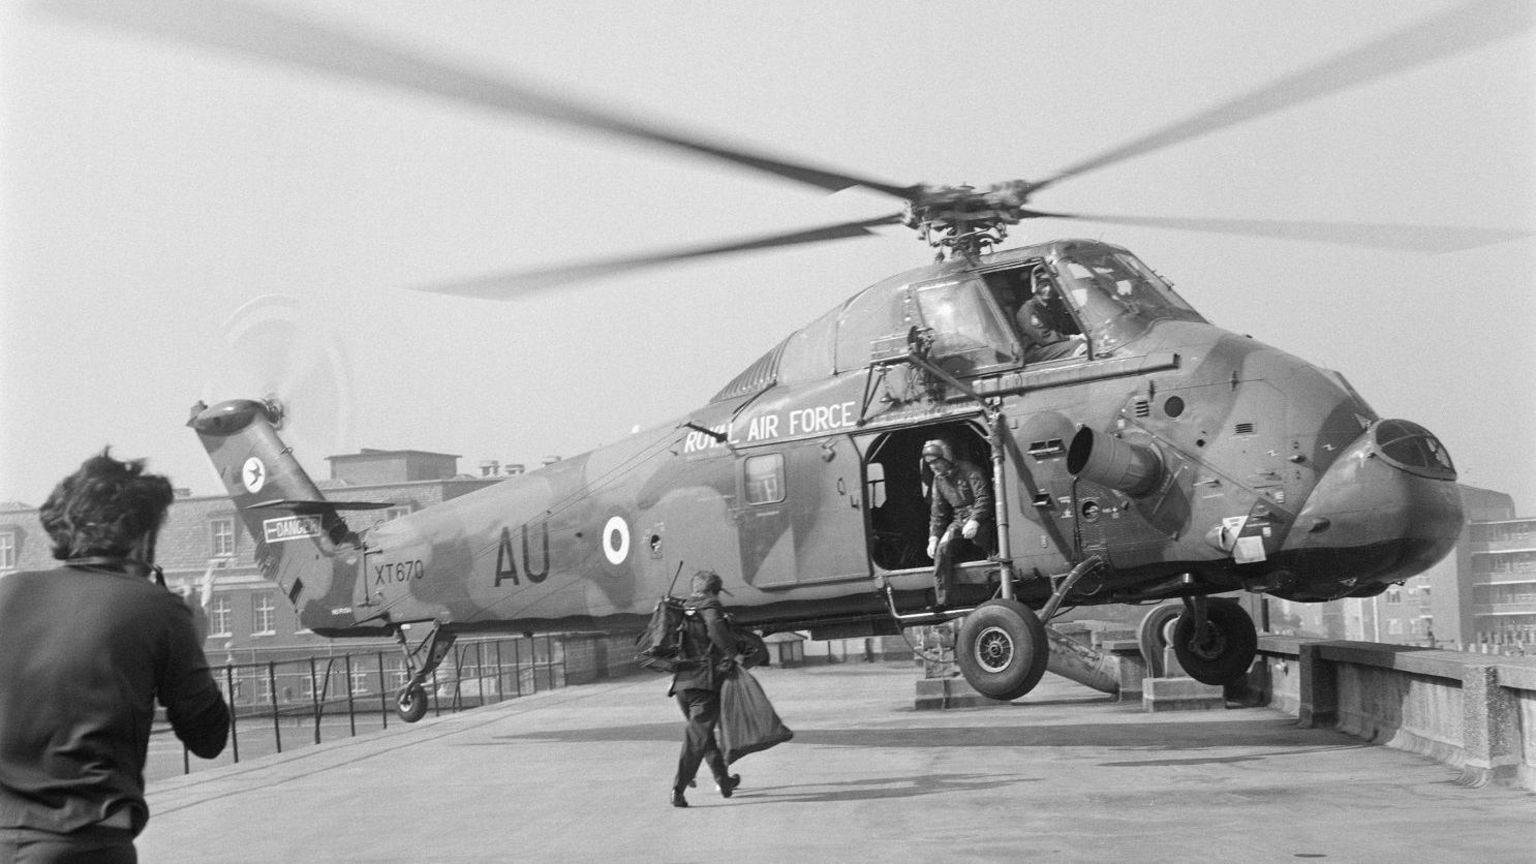 A Wessex Helicopter preparing to land on a roof top in London in a black and white photograph